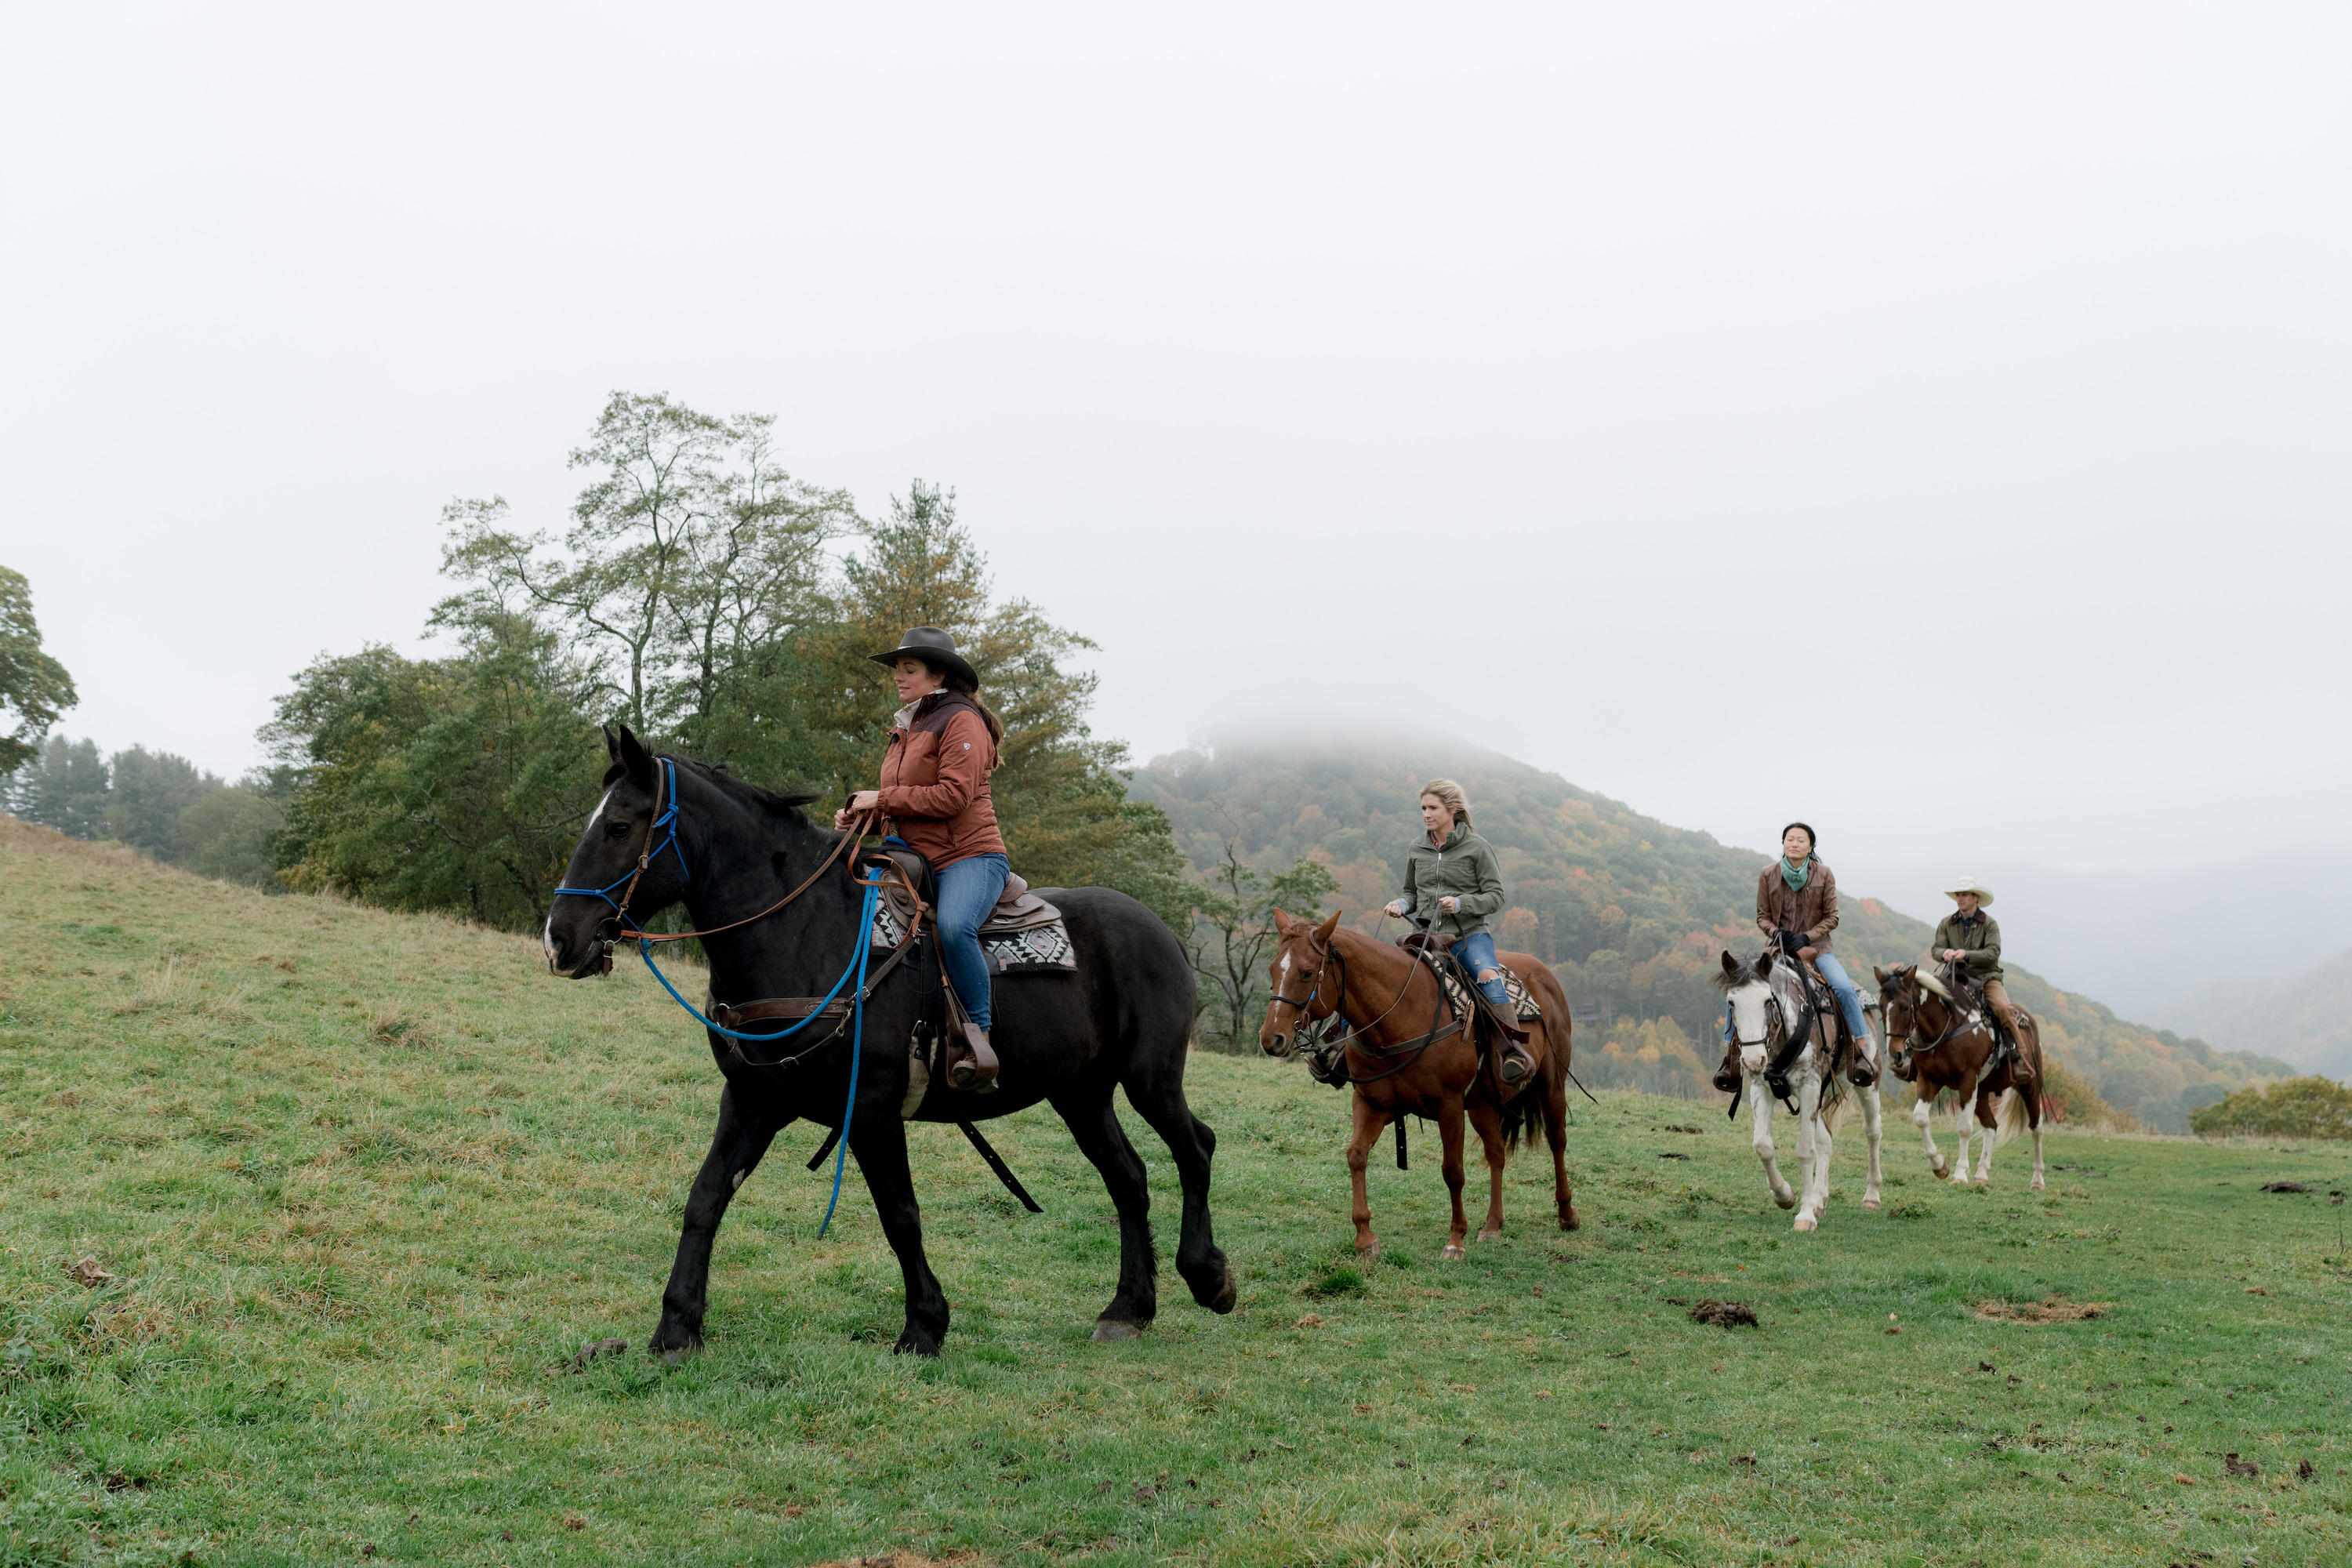 A group of riders and horses go through a mountain landscape